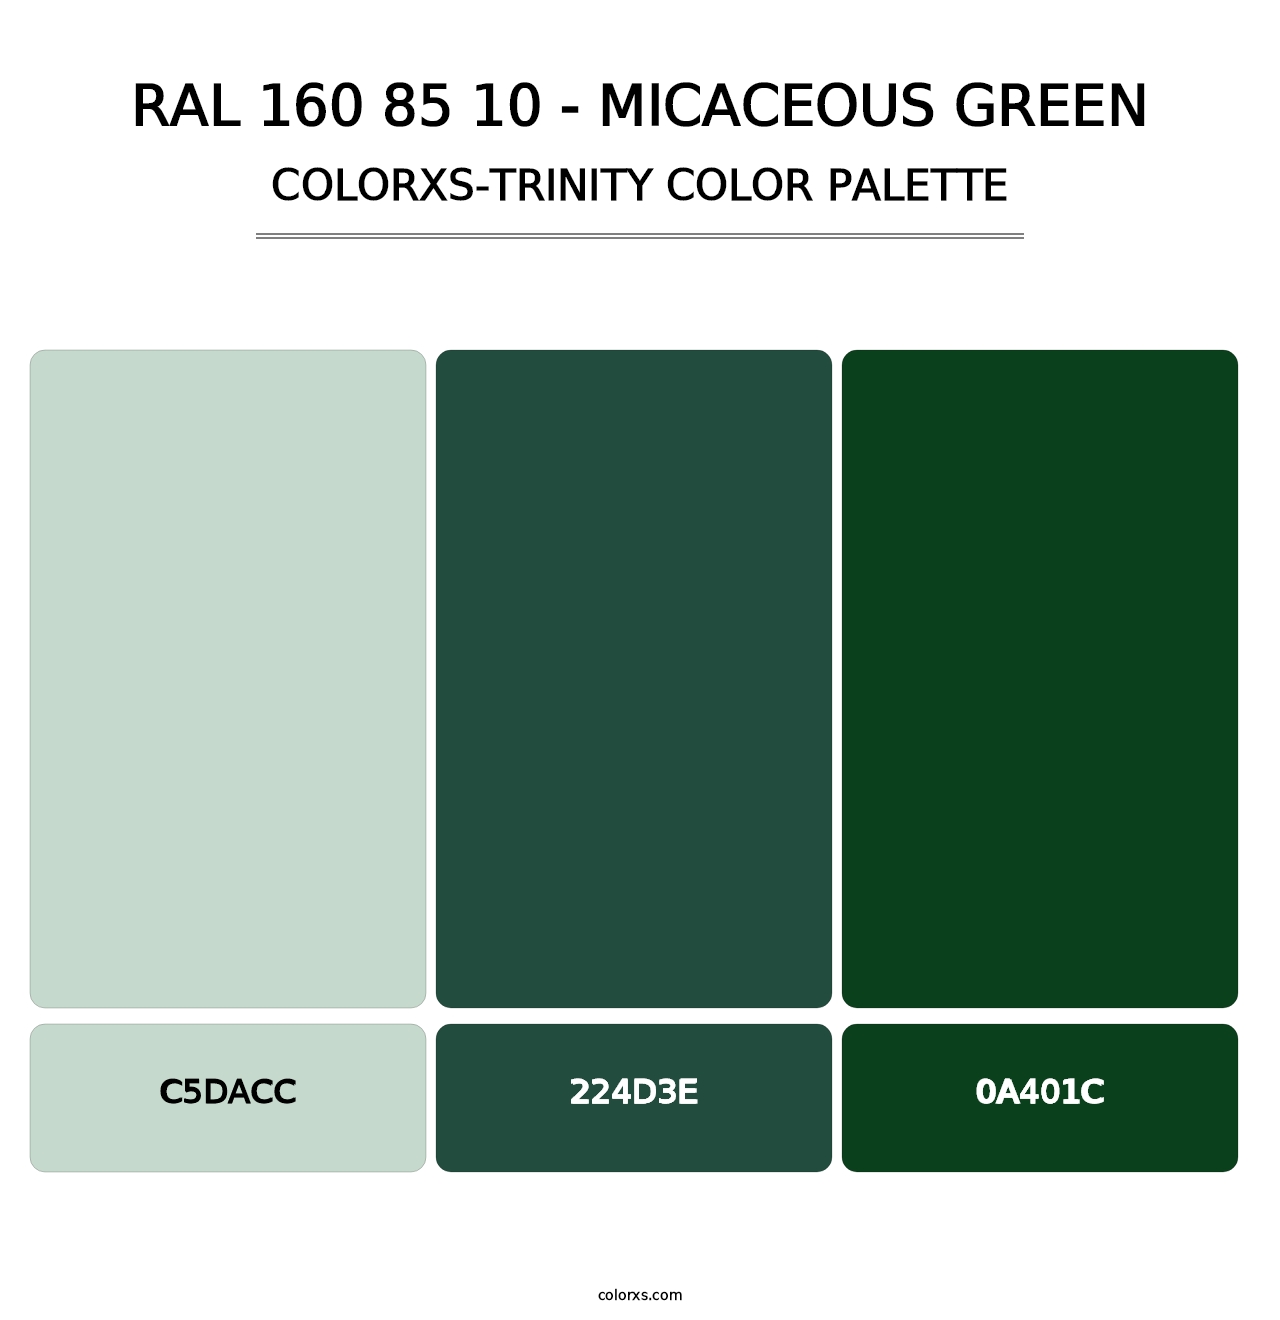 RAL 160 85 10 - Micaceous Green - Colorxs Trinity Palette